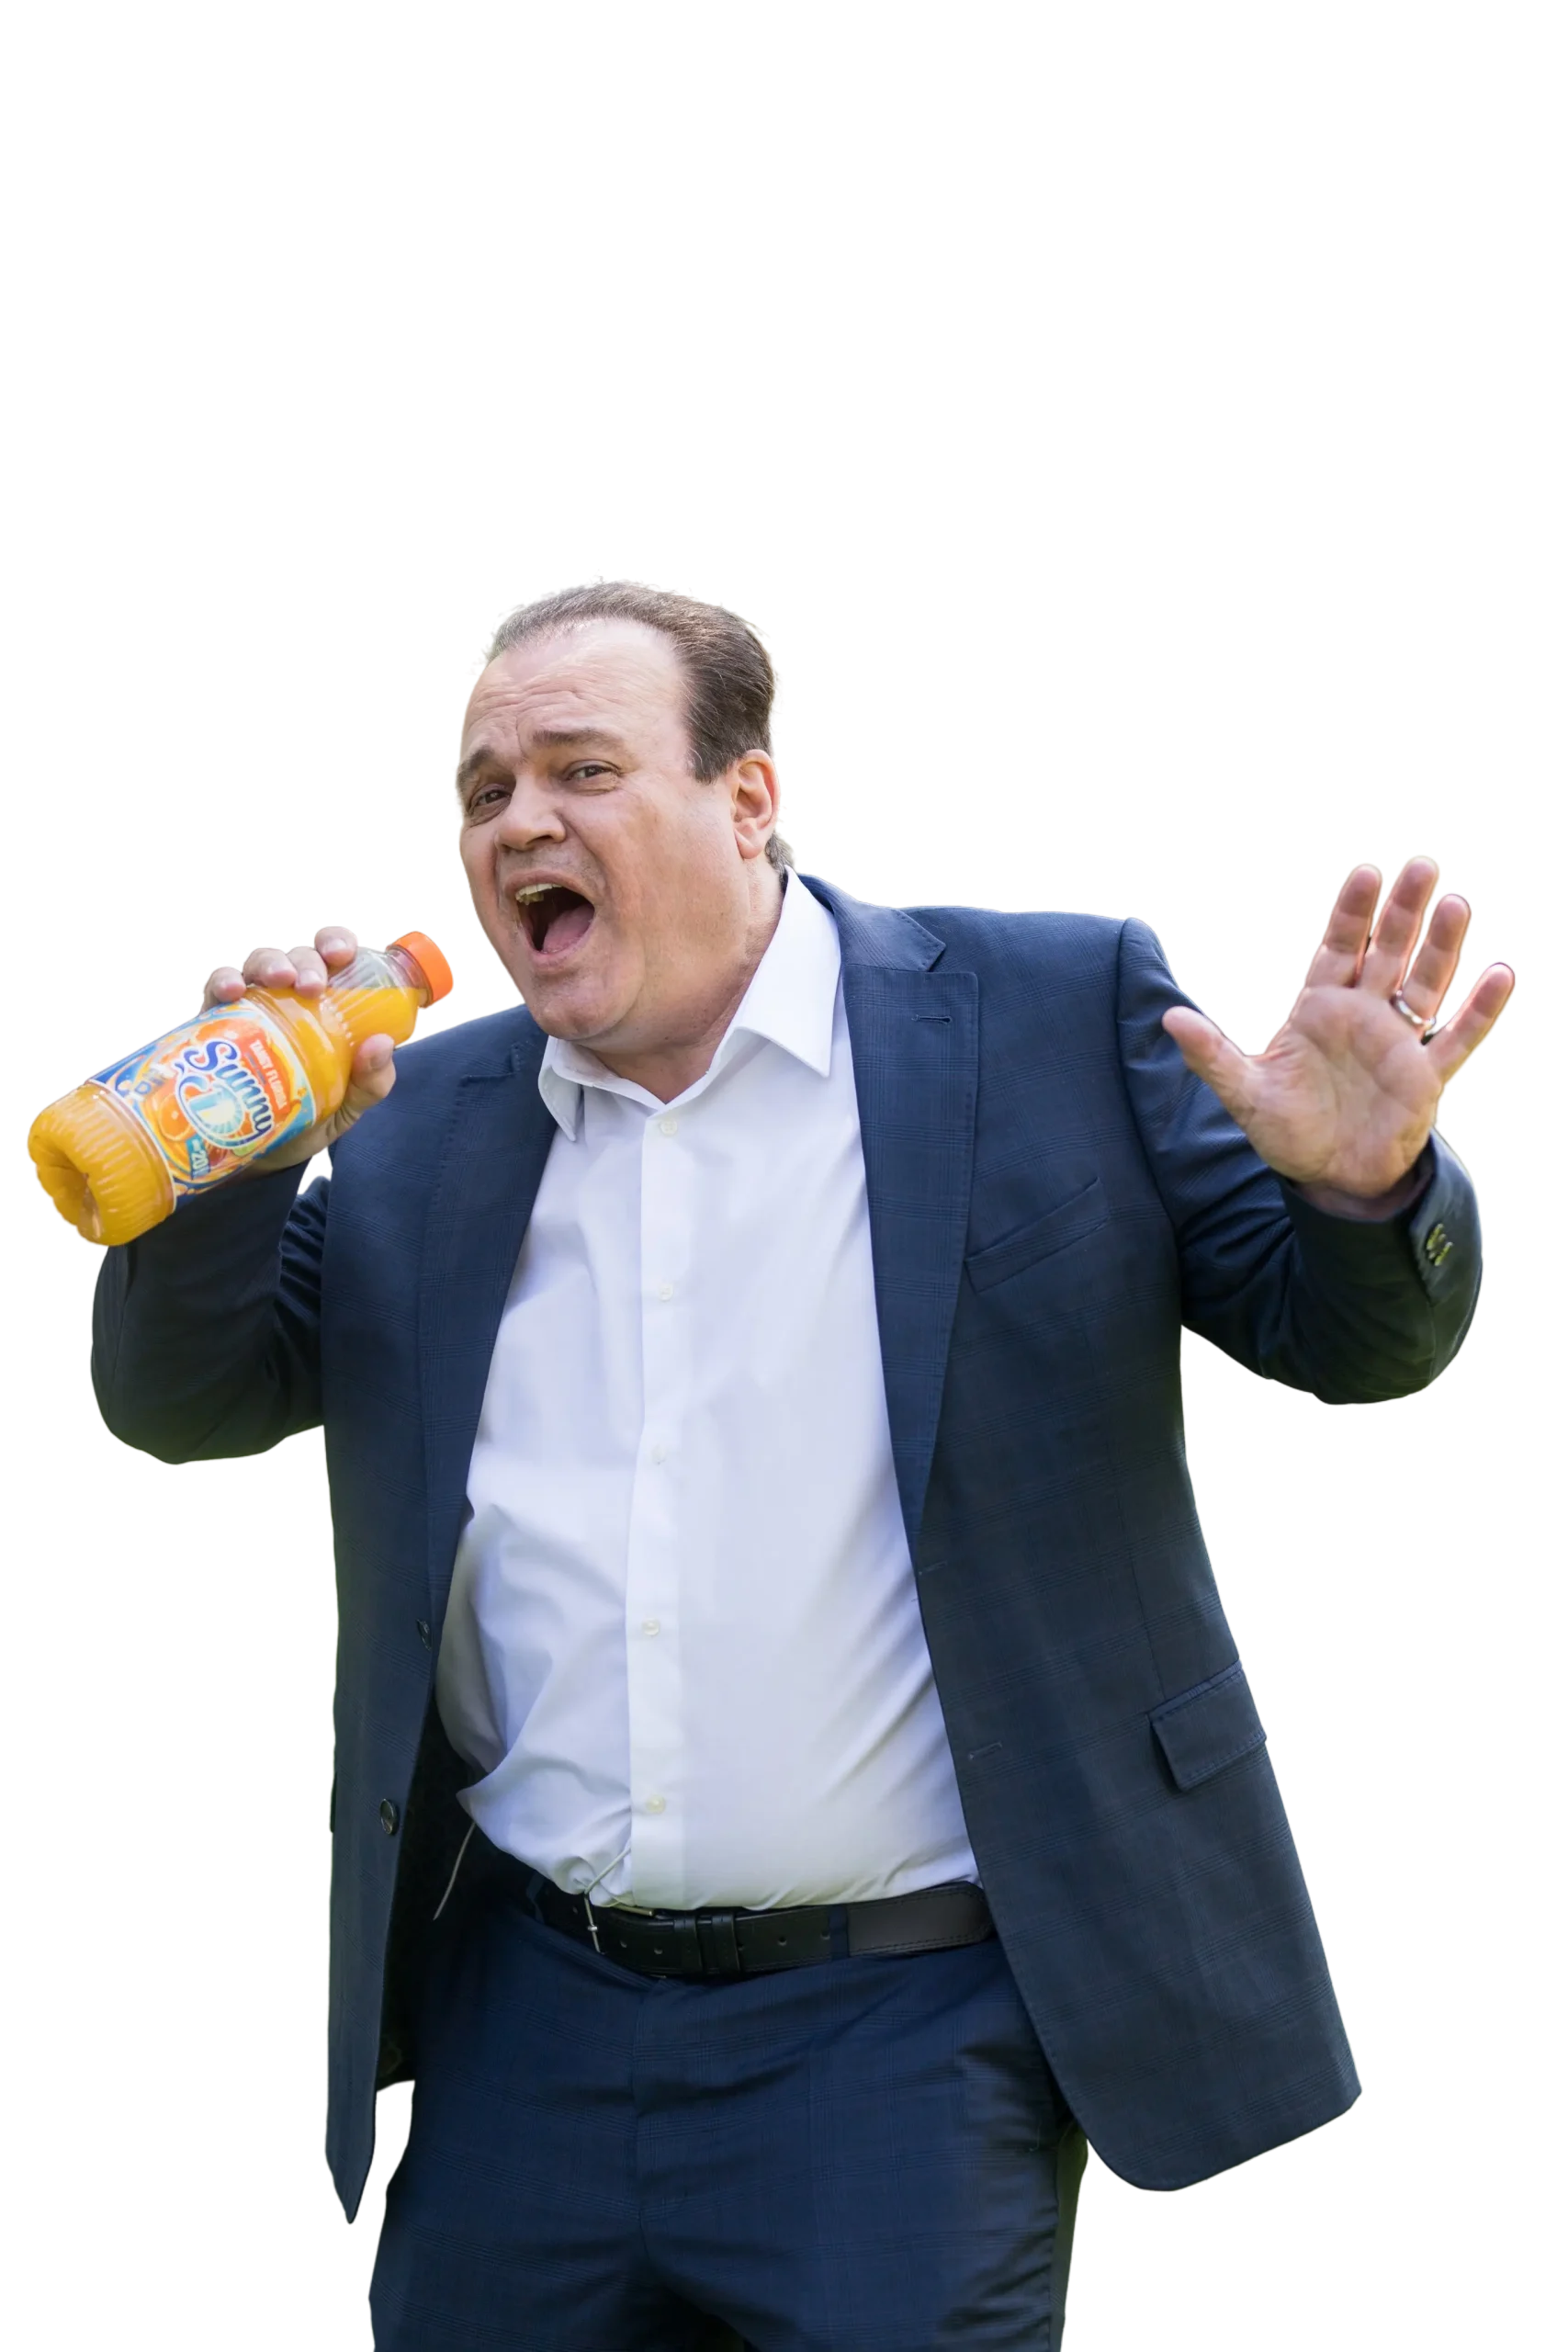 A person in a suit holding a bottle of juice